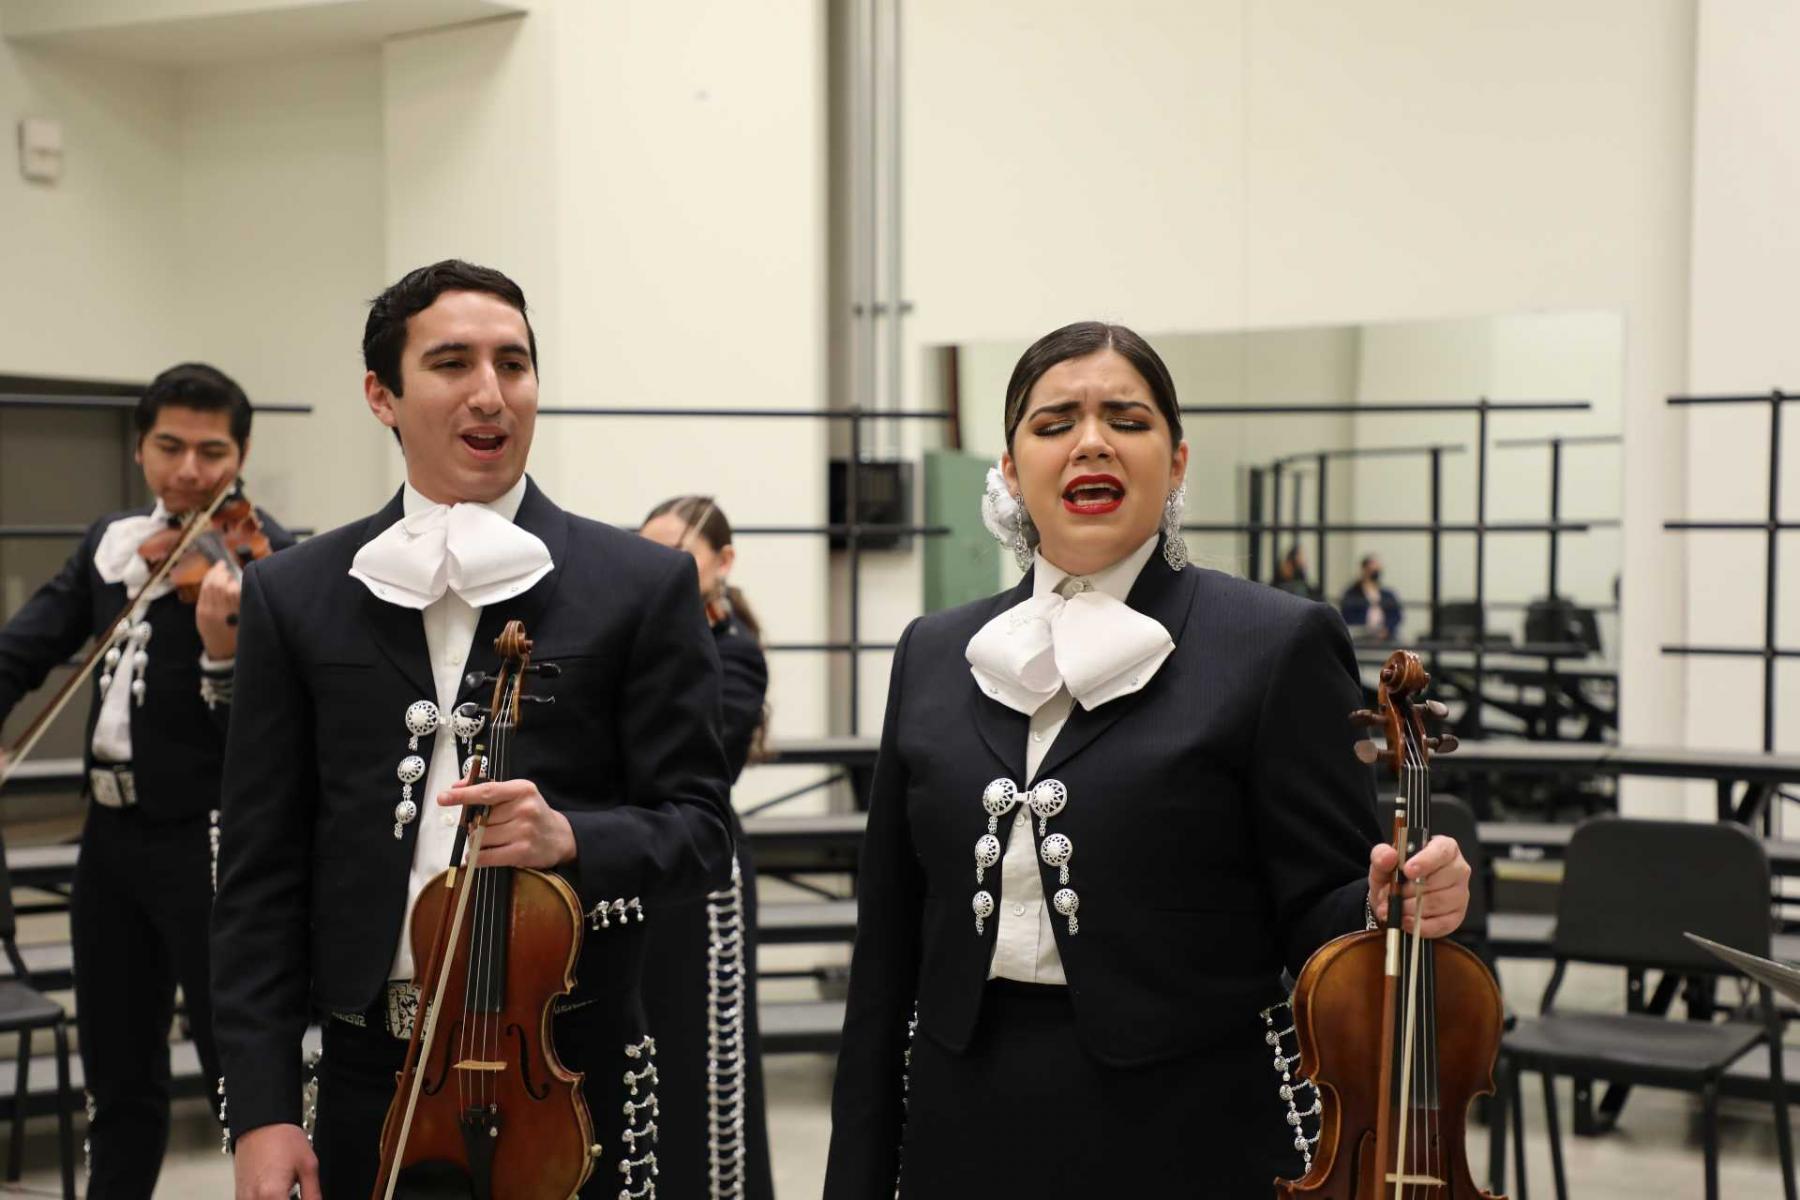 UT's Mariachi Paredes rehearses before a performance at the 2022 Doty Awards. Photo by Alicia Dietrich